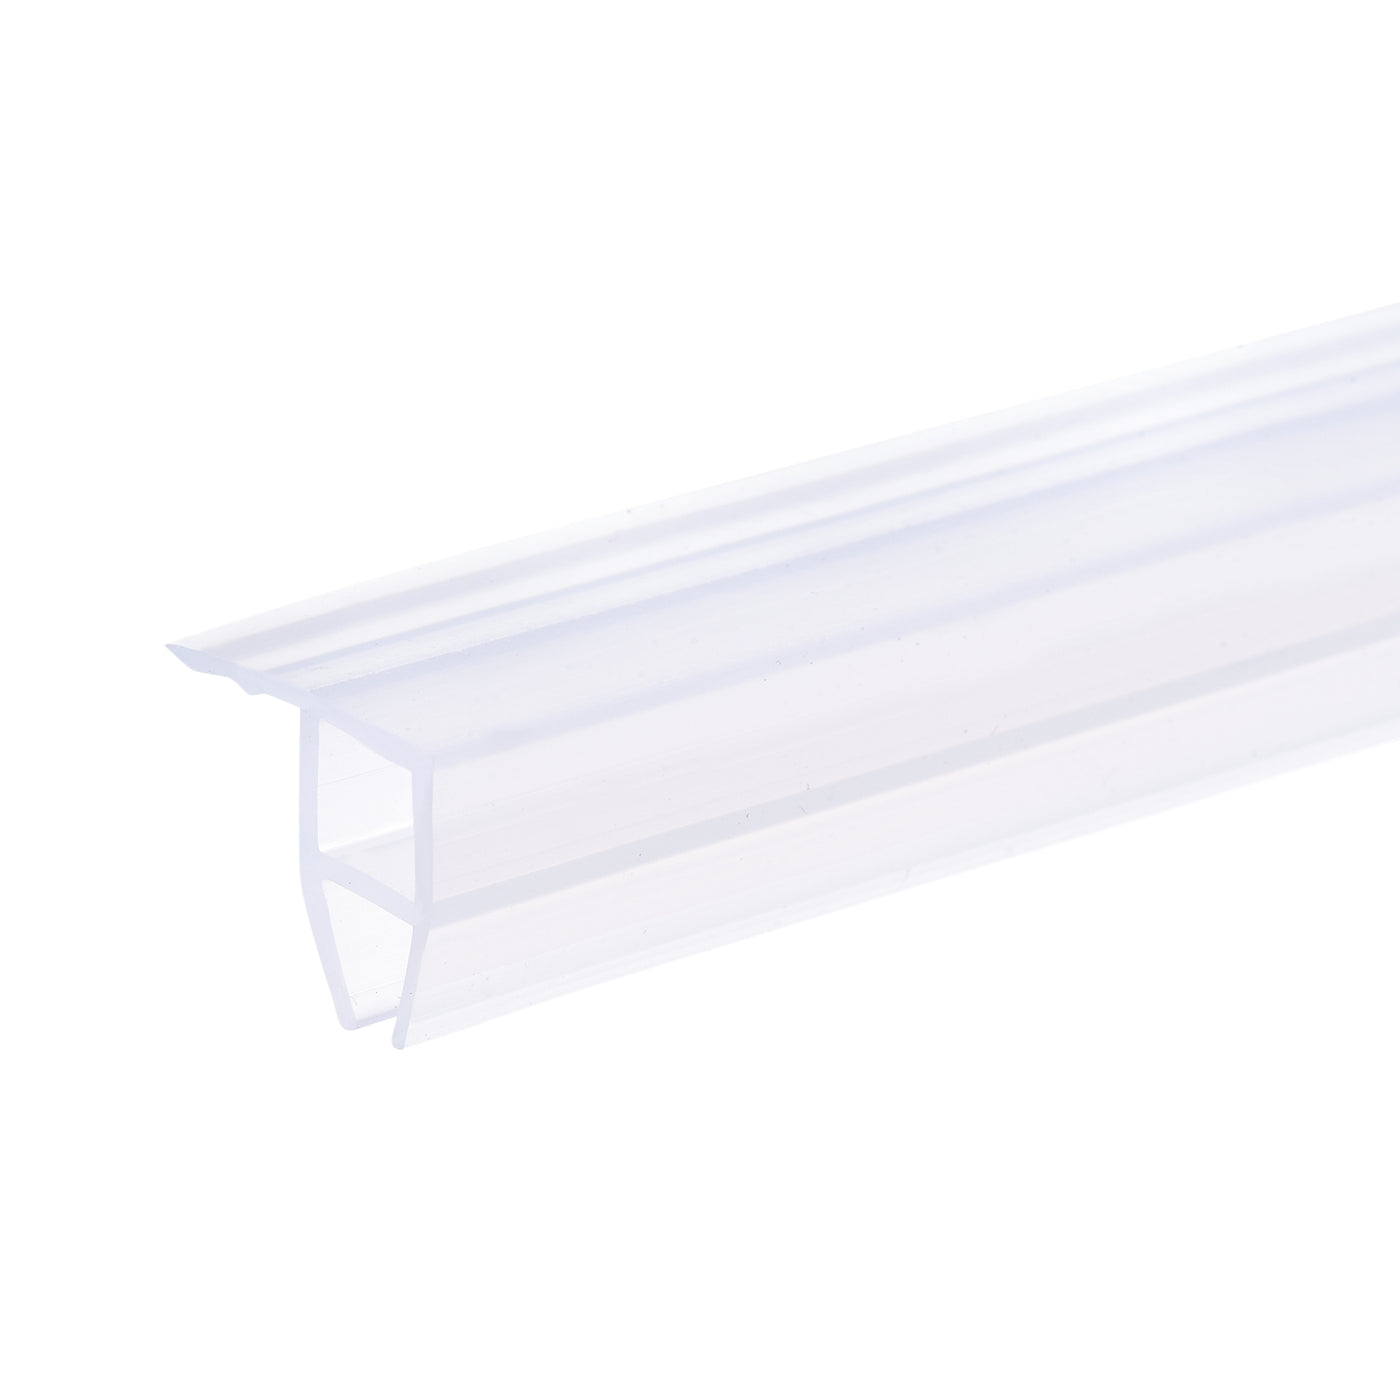 Uxcell Uxcell Frameless Glass Door Sweep 59.06" for 5/16"(8mm) Glass Corner-Type Seal Strip